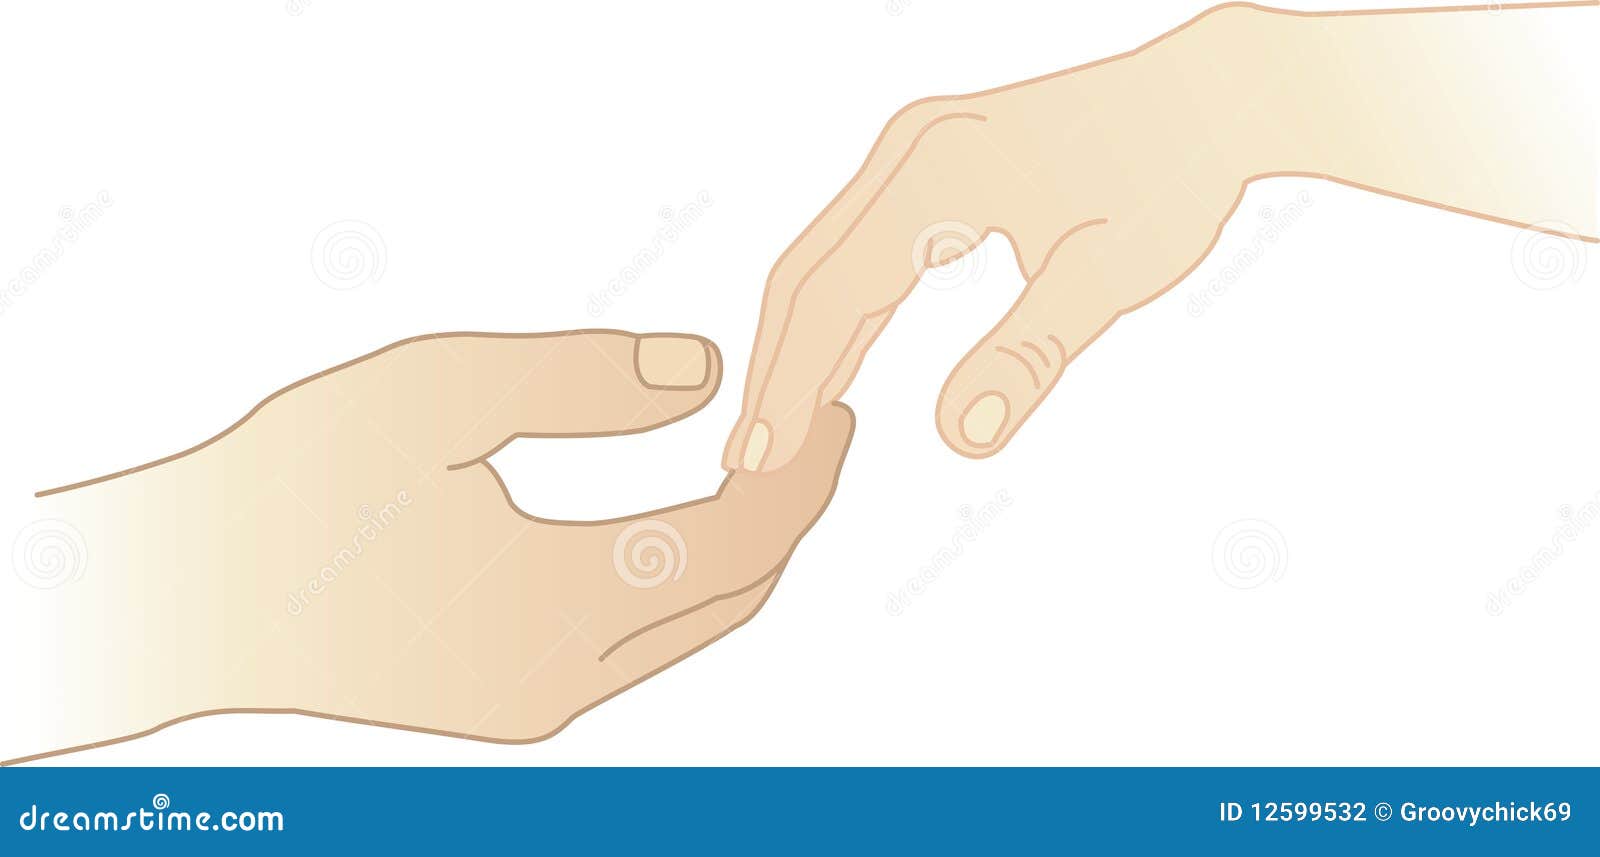 Adults touching hands. Two people reaching out to each other for love and support. This is a vector illustration and can be scaled to any size or edited.